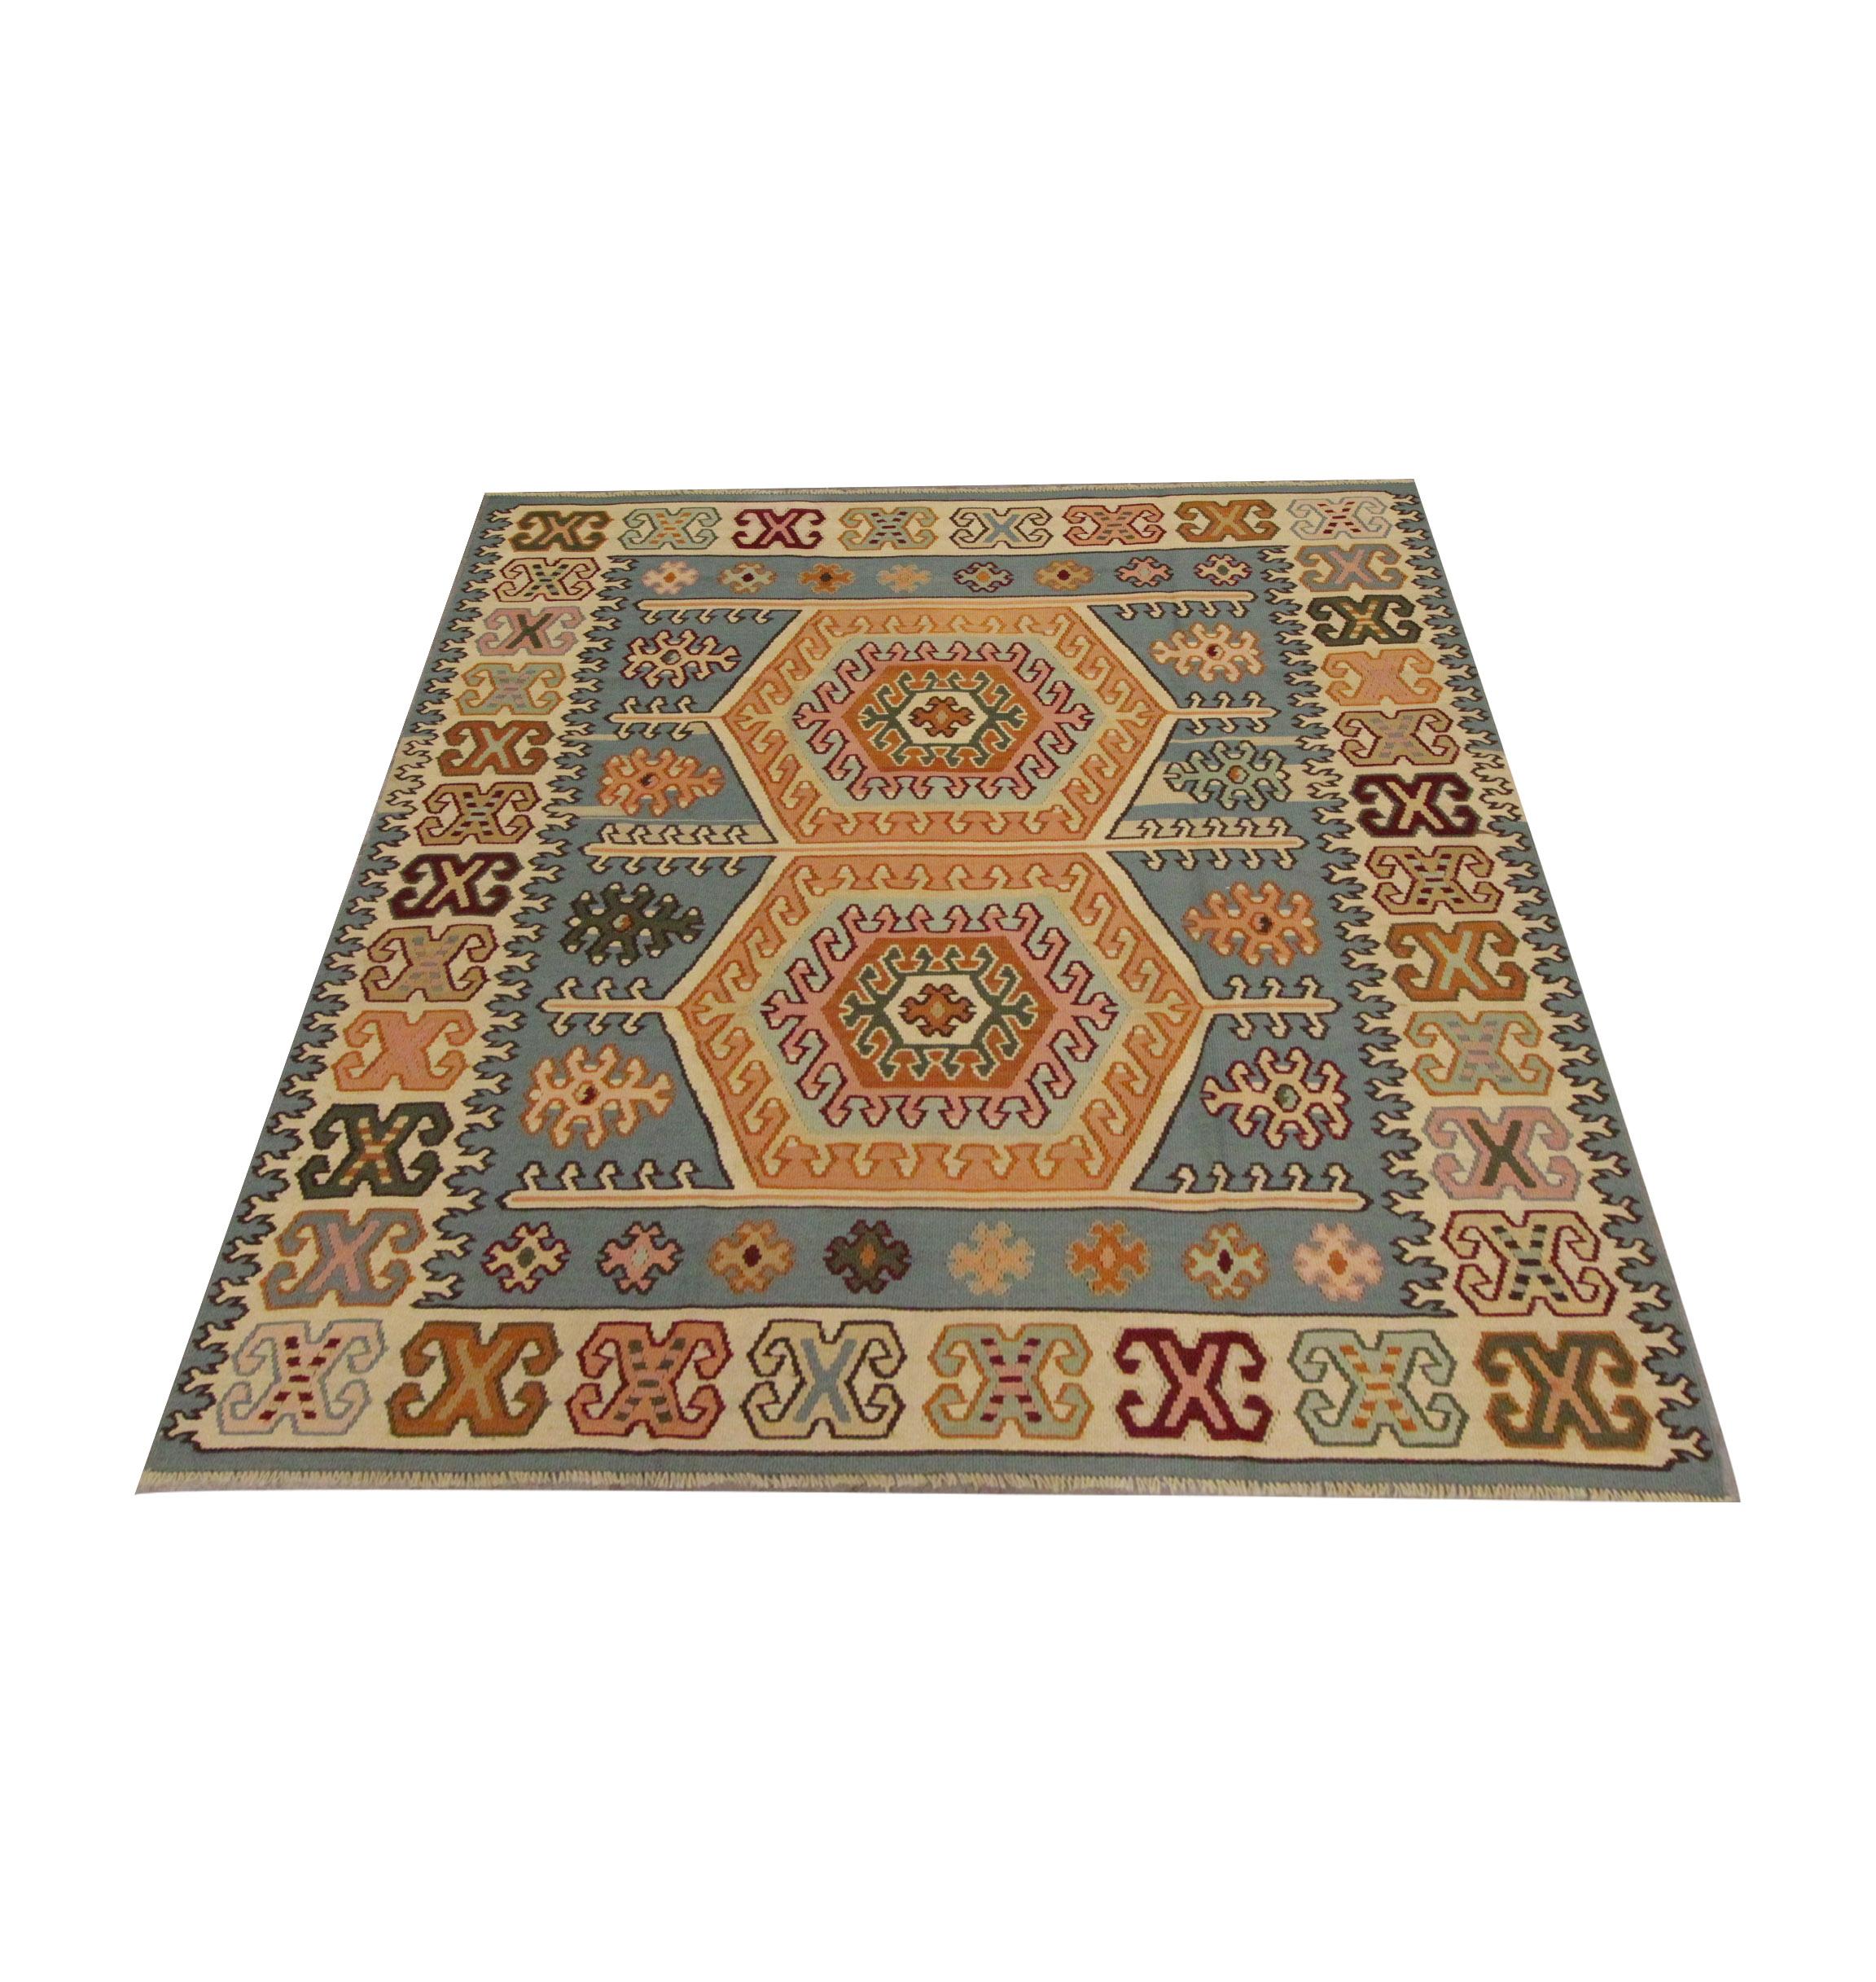 This small wool rug is a handmade Kilim woven in the early 20th century. The design has been woven in beige, rust-brown and blue accents on a subtle light-blue background. The bold tribal hook motifs and medallions pair beautifully with the colour